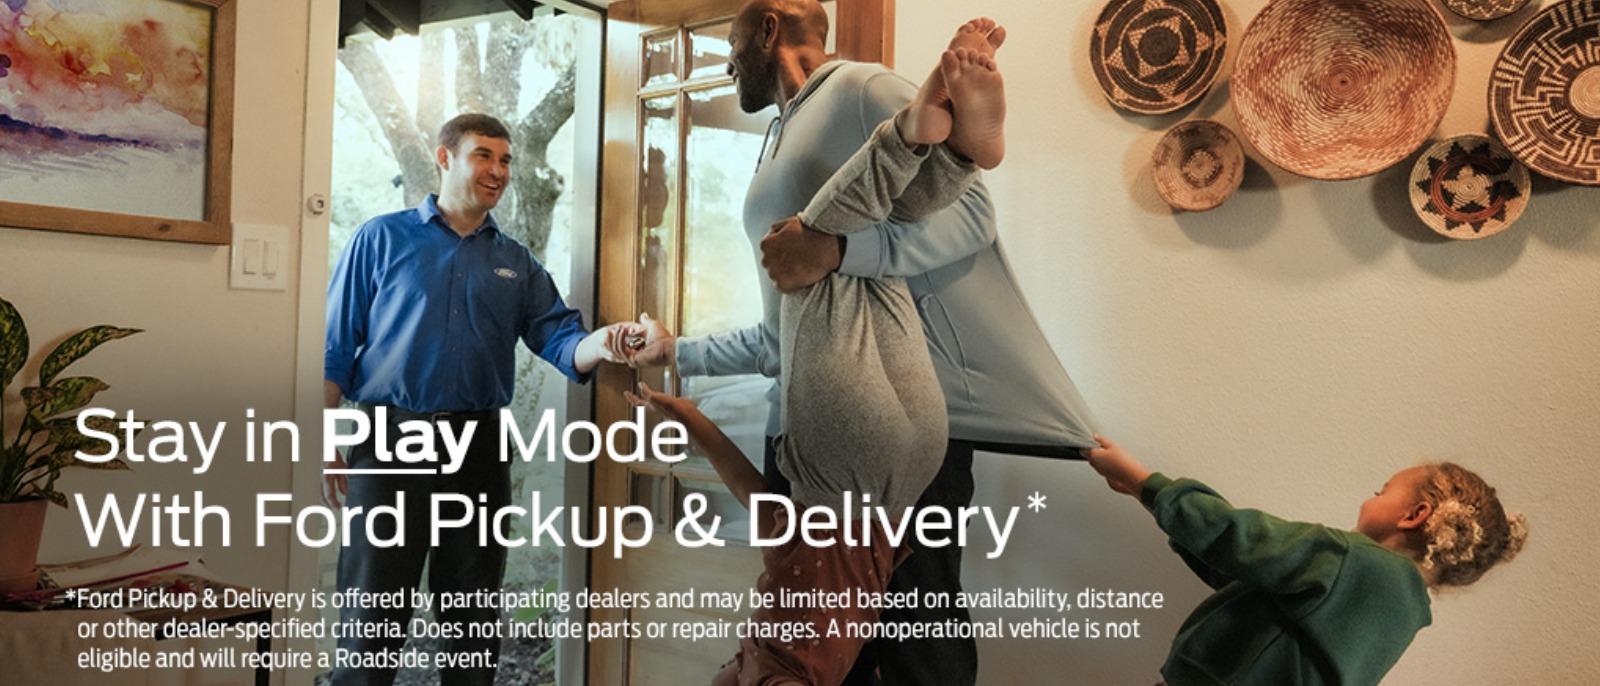 Stay in Play Mode With Ford Pickup & Delivery*
*Ford Pickup & Delivery is offered by participating dealers and may be limited based on availability, distance or other dealer-specified criteria. Does not include parts or repair charges. A nonoperational vehicle is not eligible and will require a Roadside event.